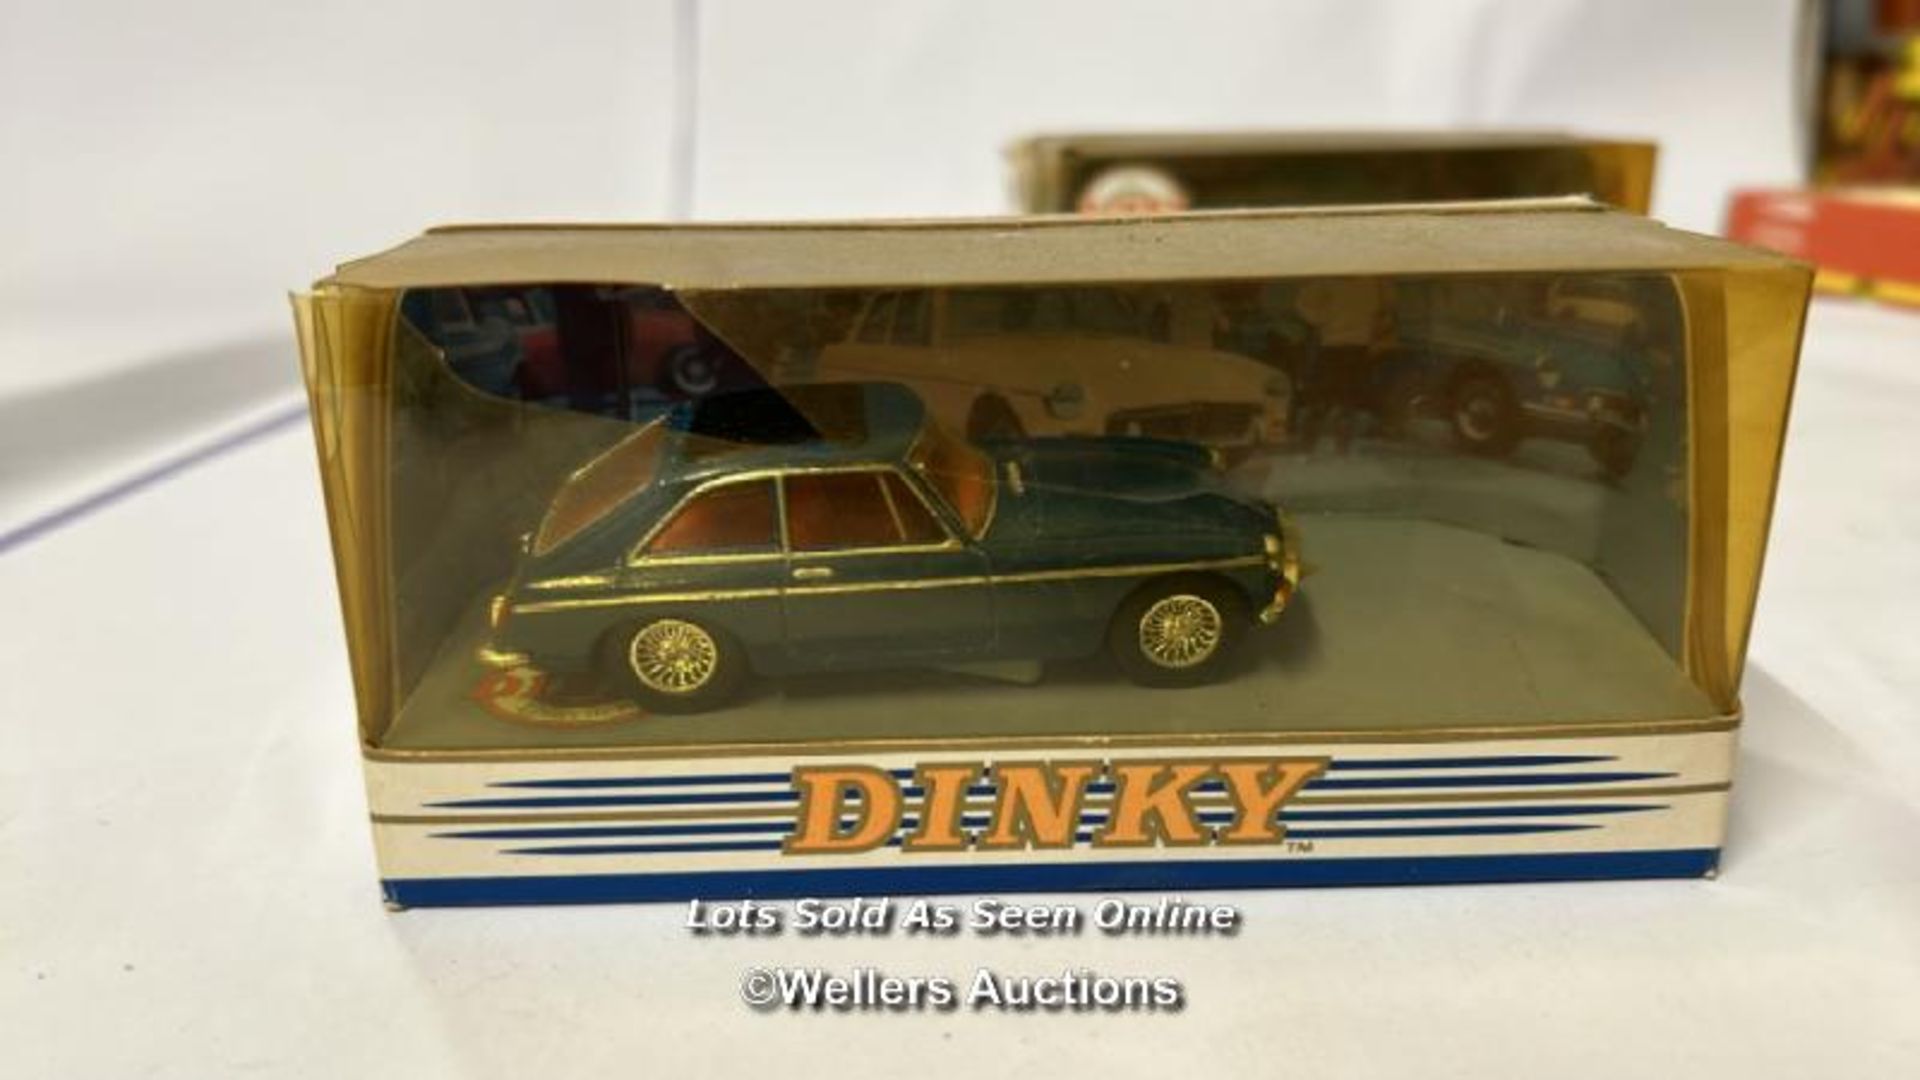 Four Dinky diecast cars and one Vanguards van including 1968 Jaguar E-type and 1973 Ferrari / AN3 - Image 7 of 10